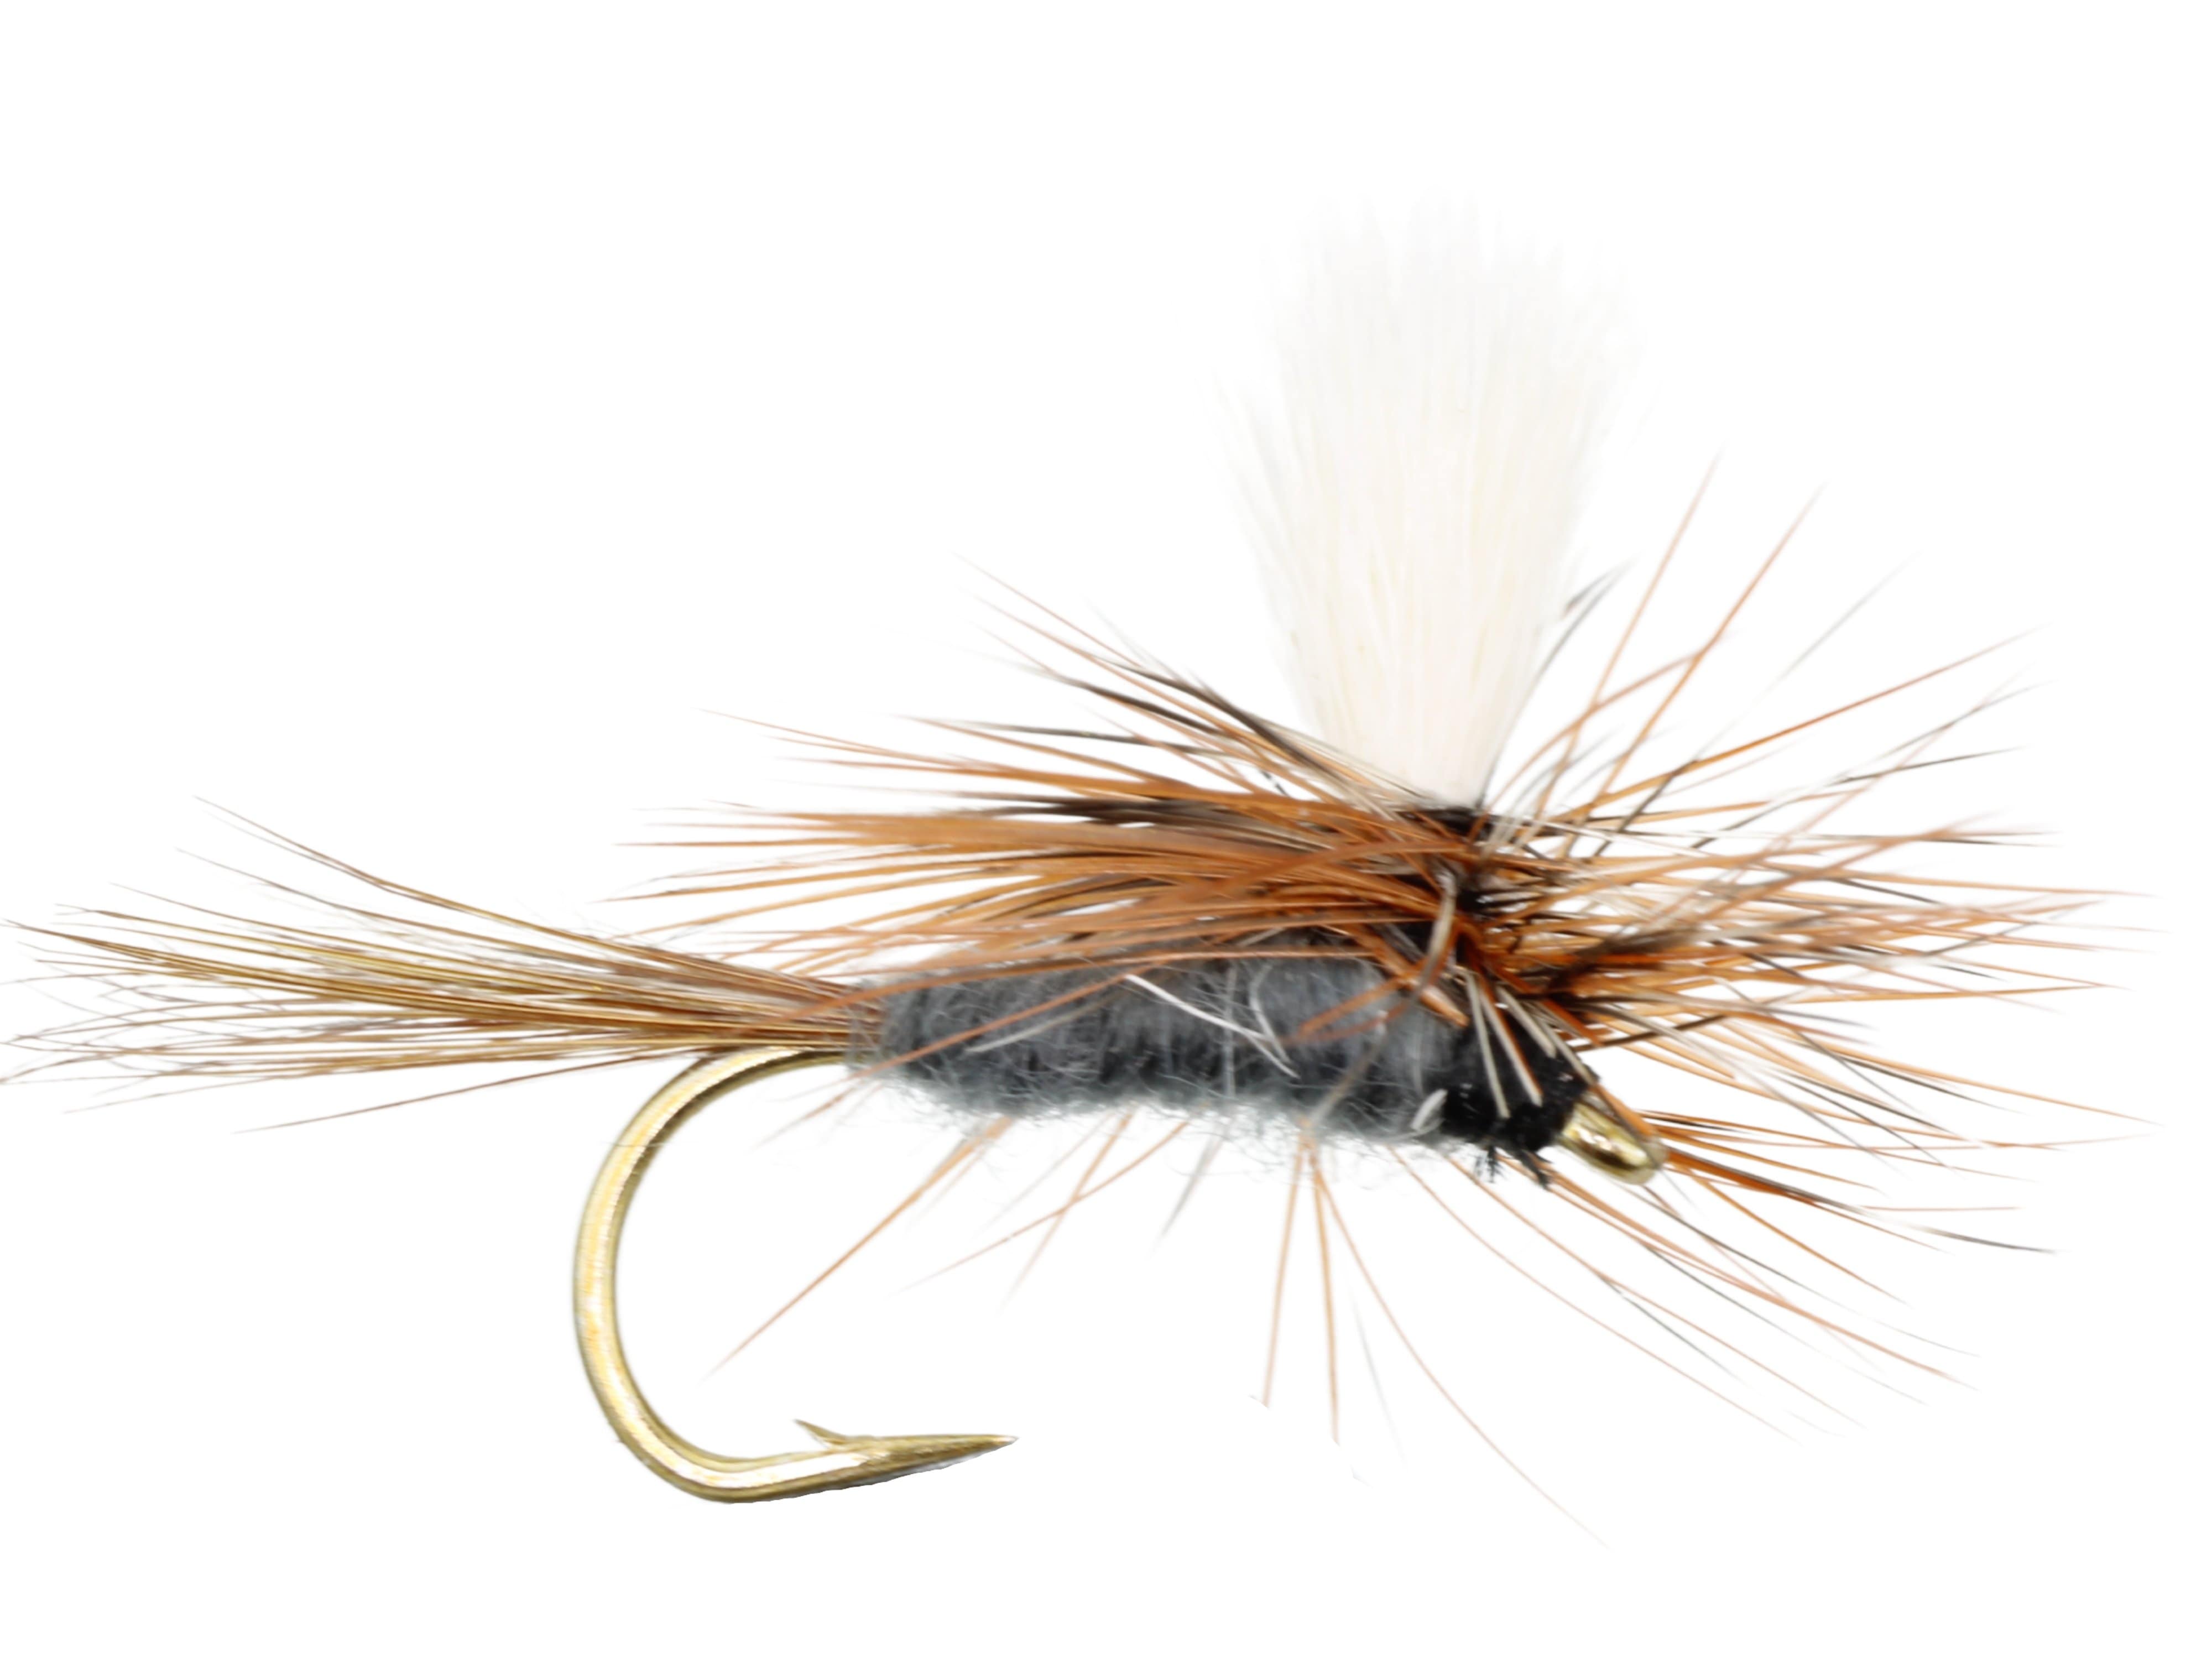 Wild Water Fly Fishing Fly Tying Material Kit, Parachute Adams